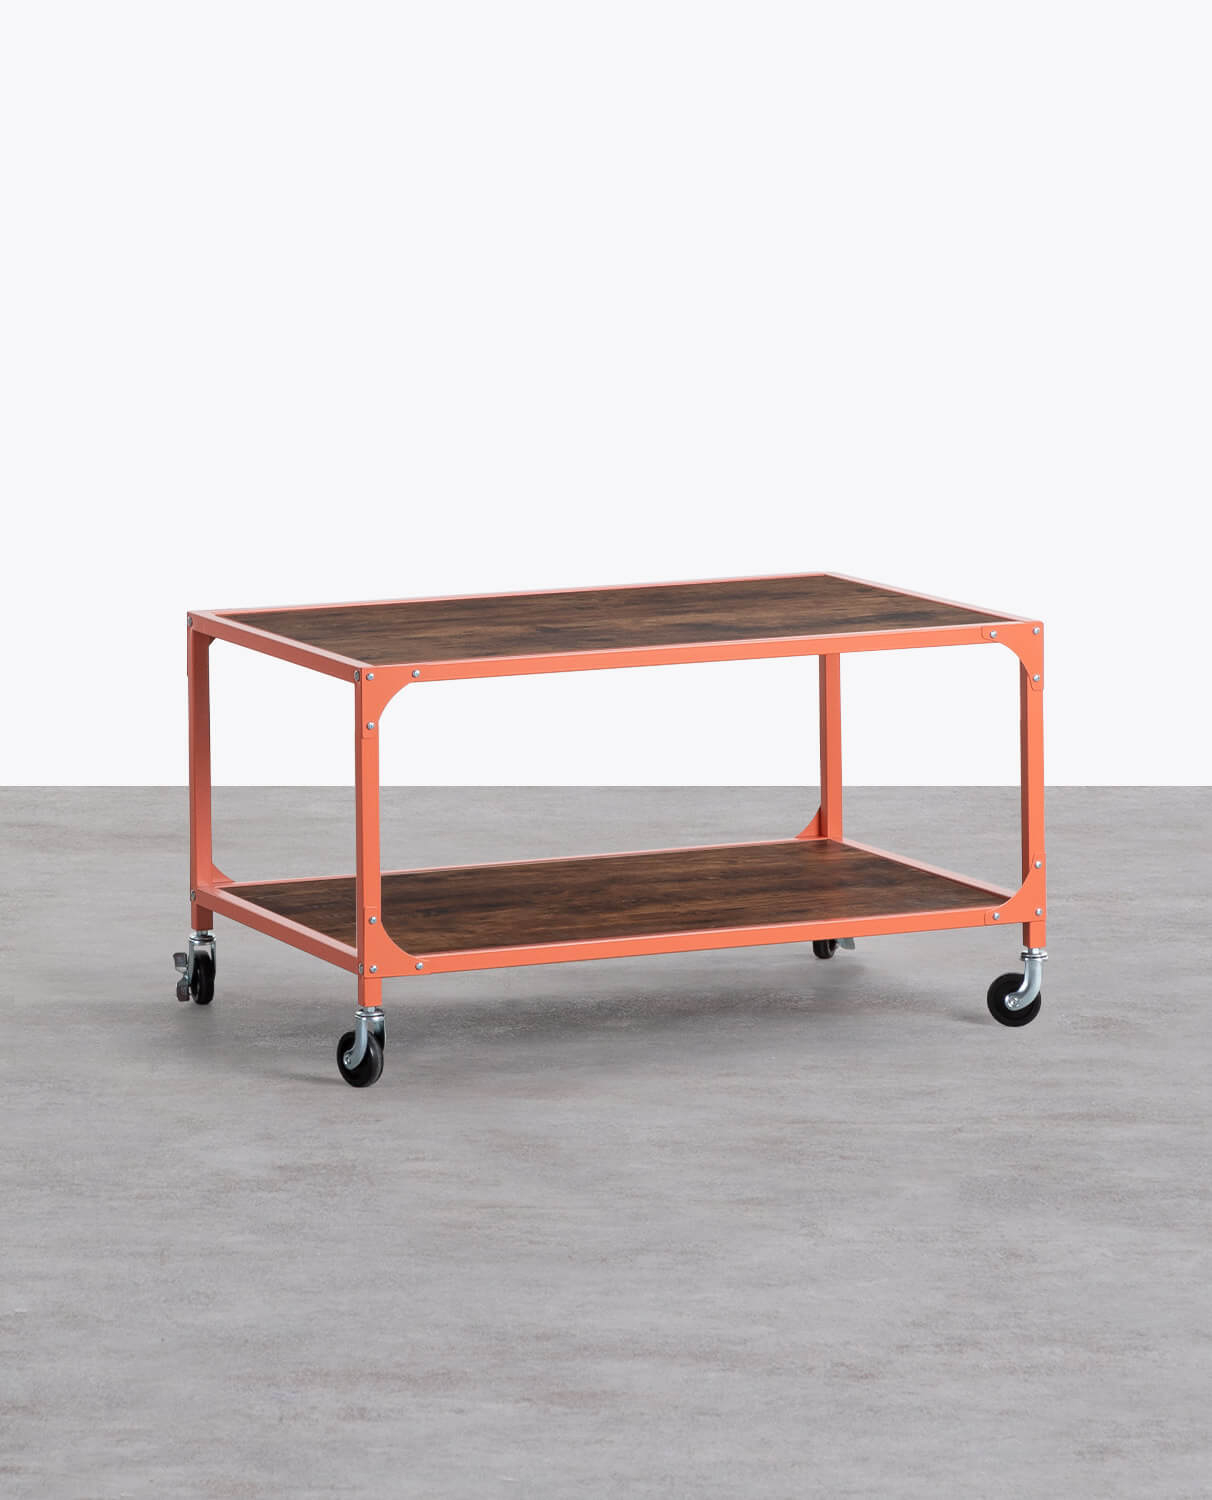 Steel and Wood Coffee Table with Wheels (55x80) Roda, gallery image 1